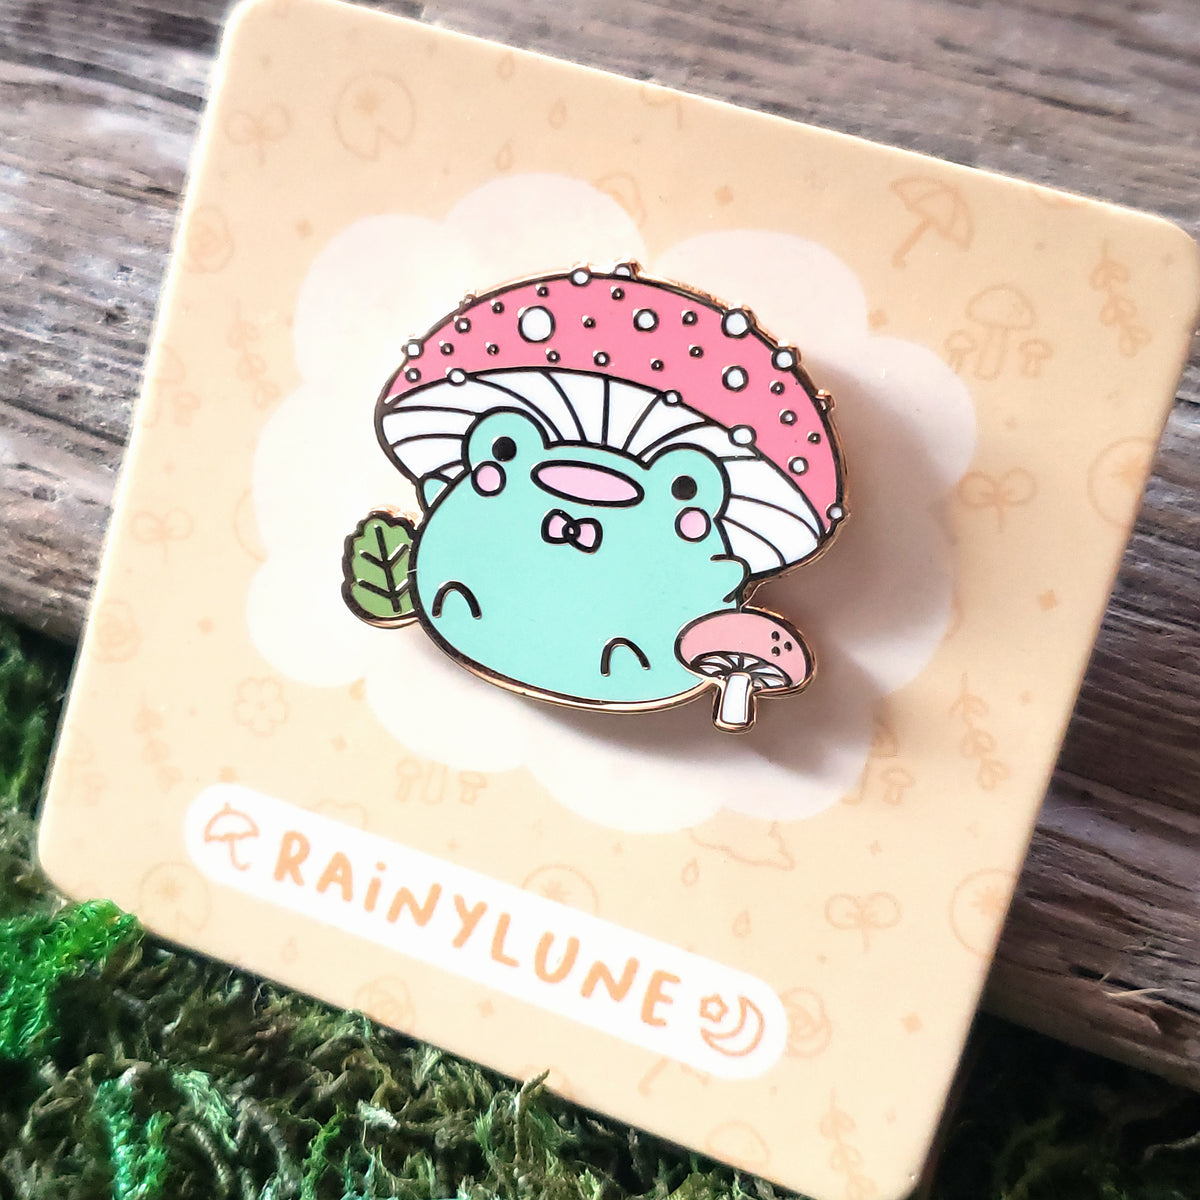 Mushroom Hat Friend the Frog Pin – Connect Boutique